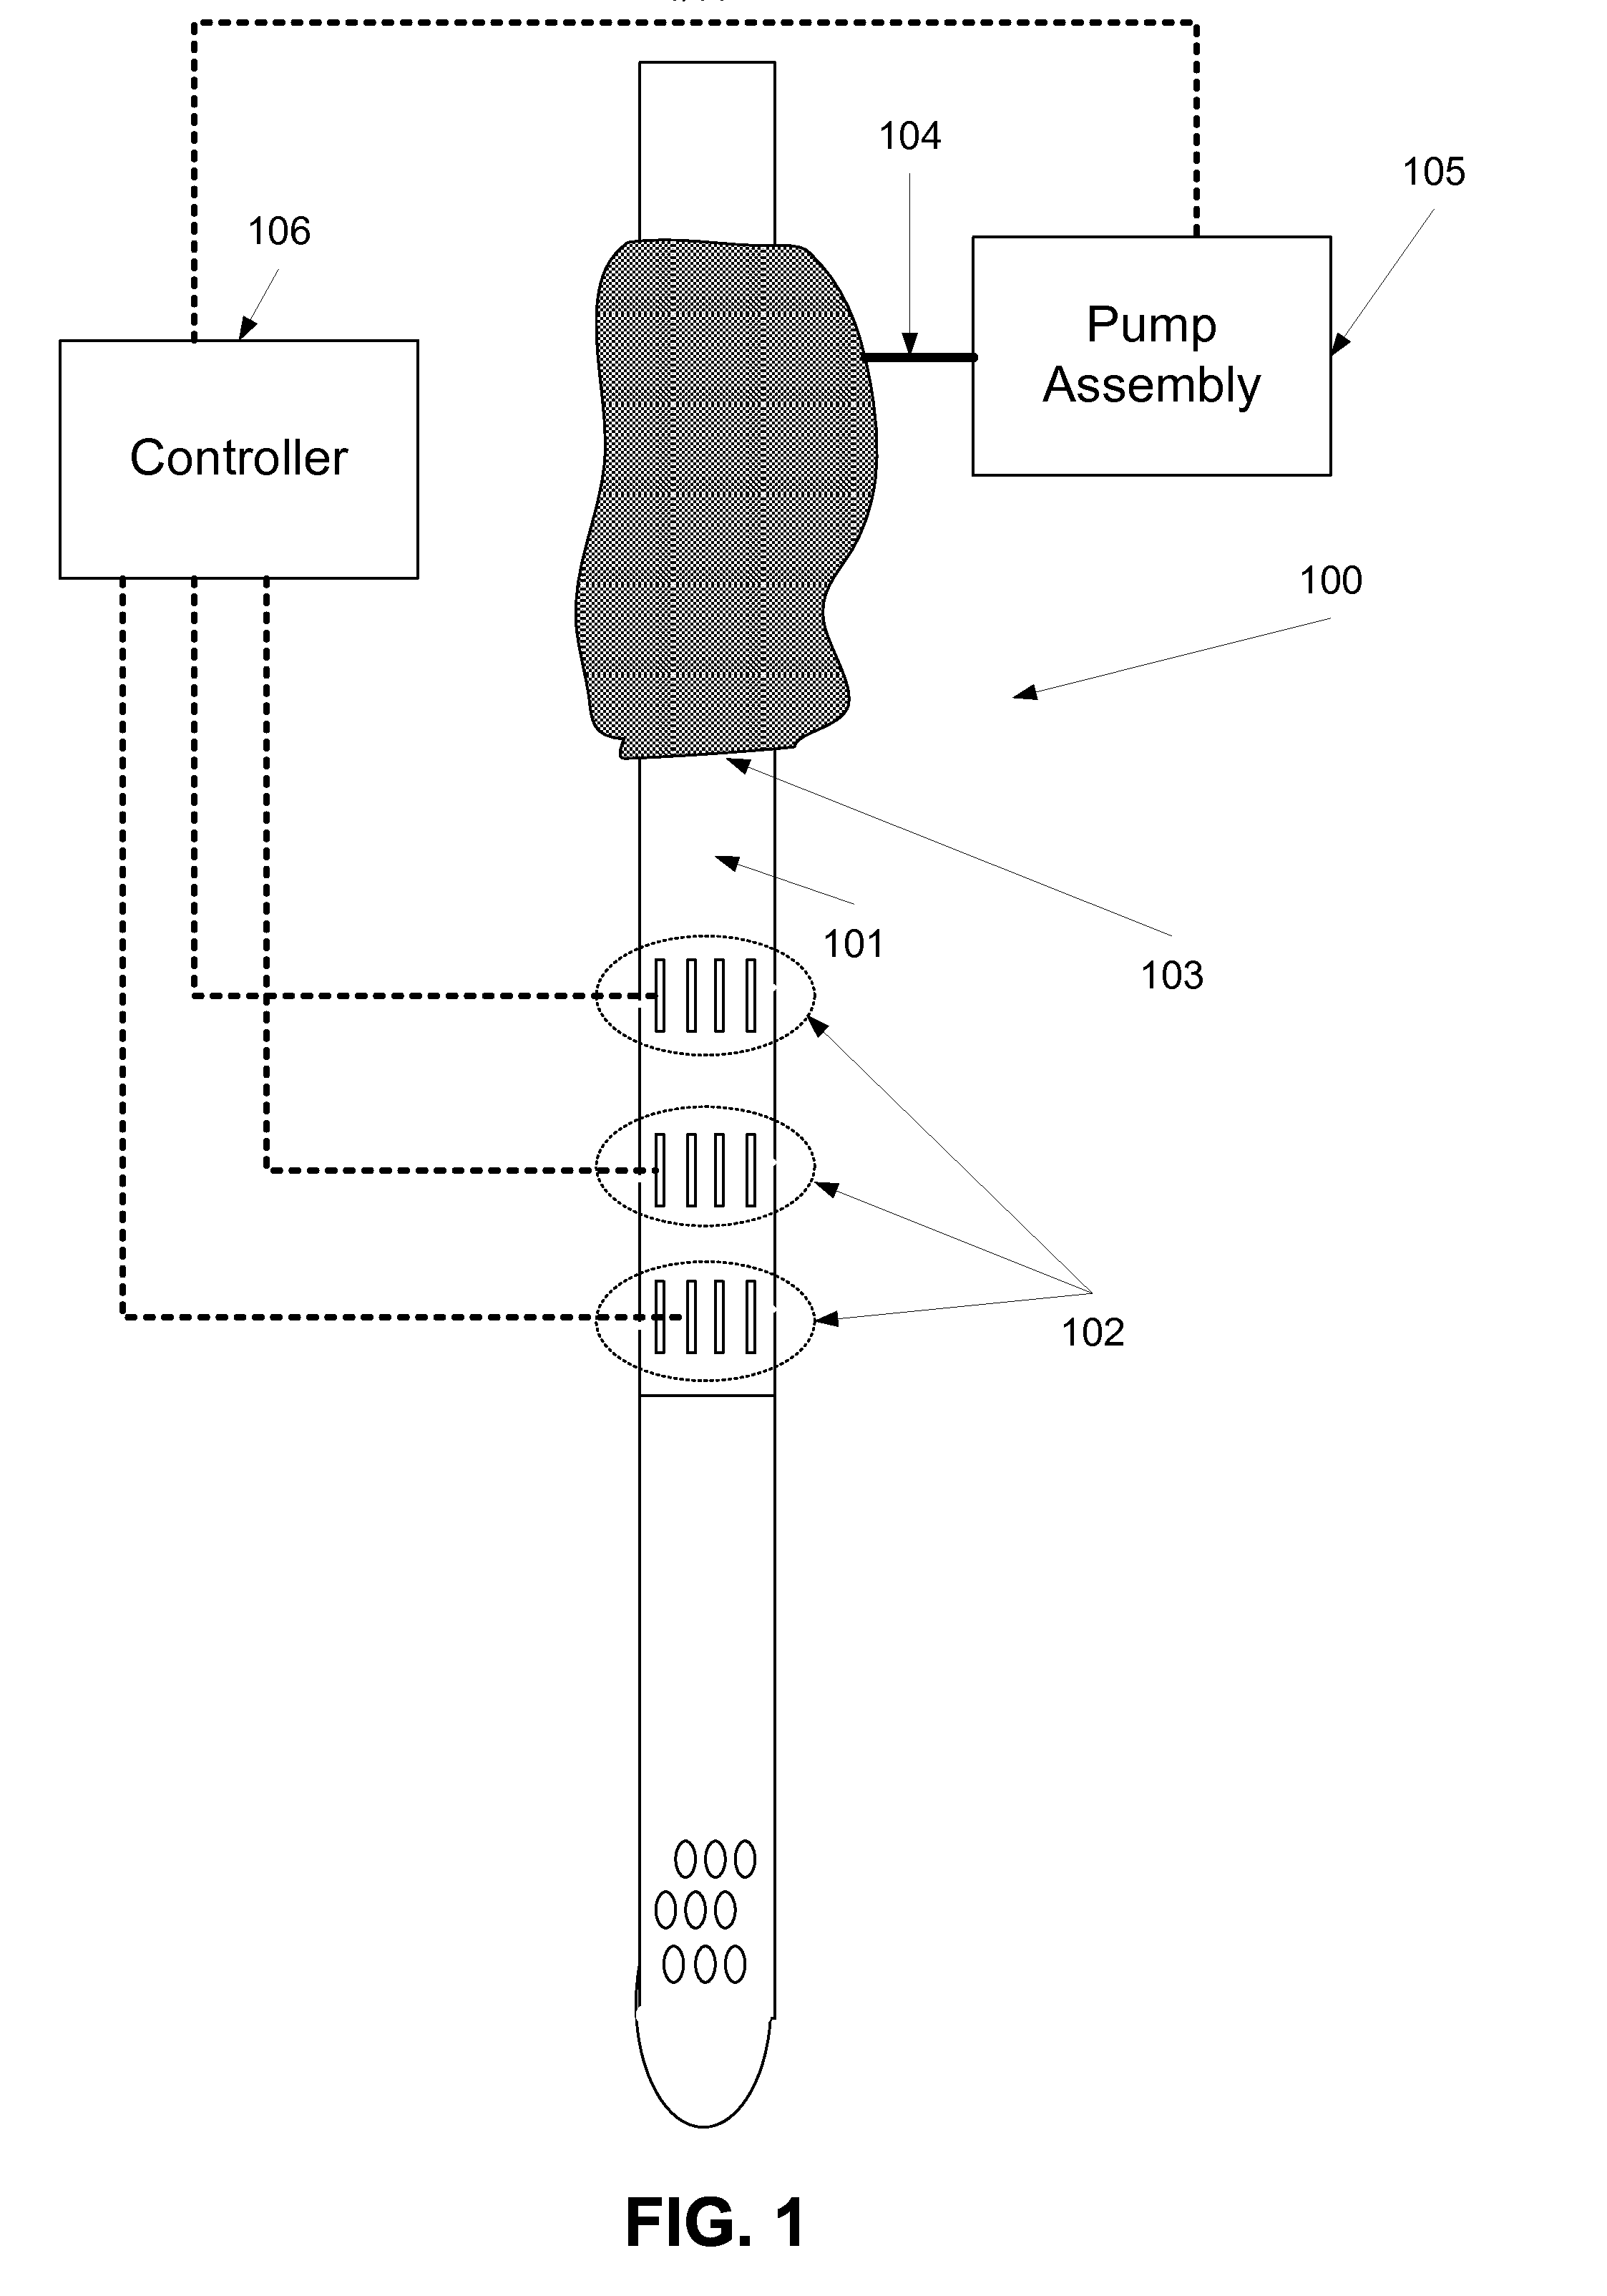 Method and device of detecting and/or blocking reflux